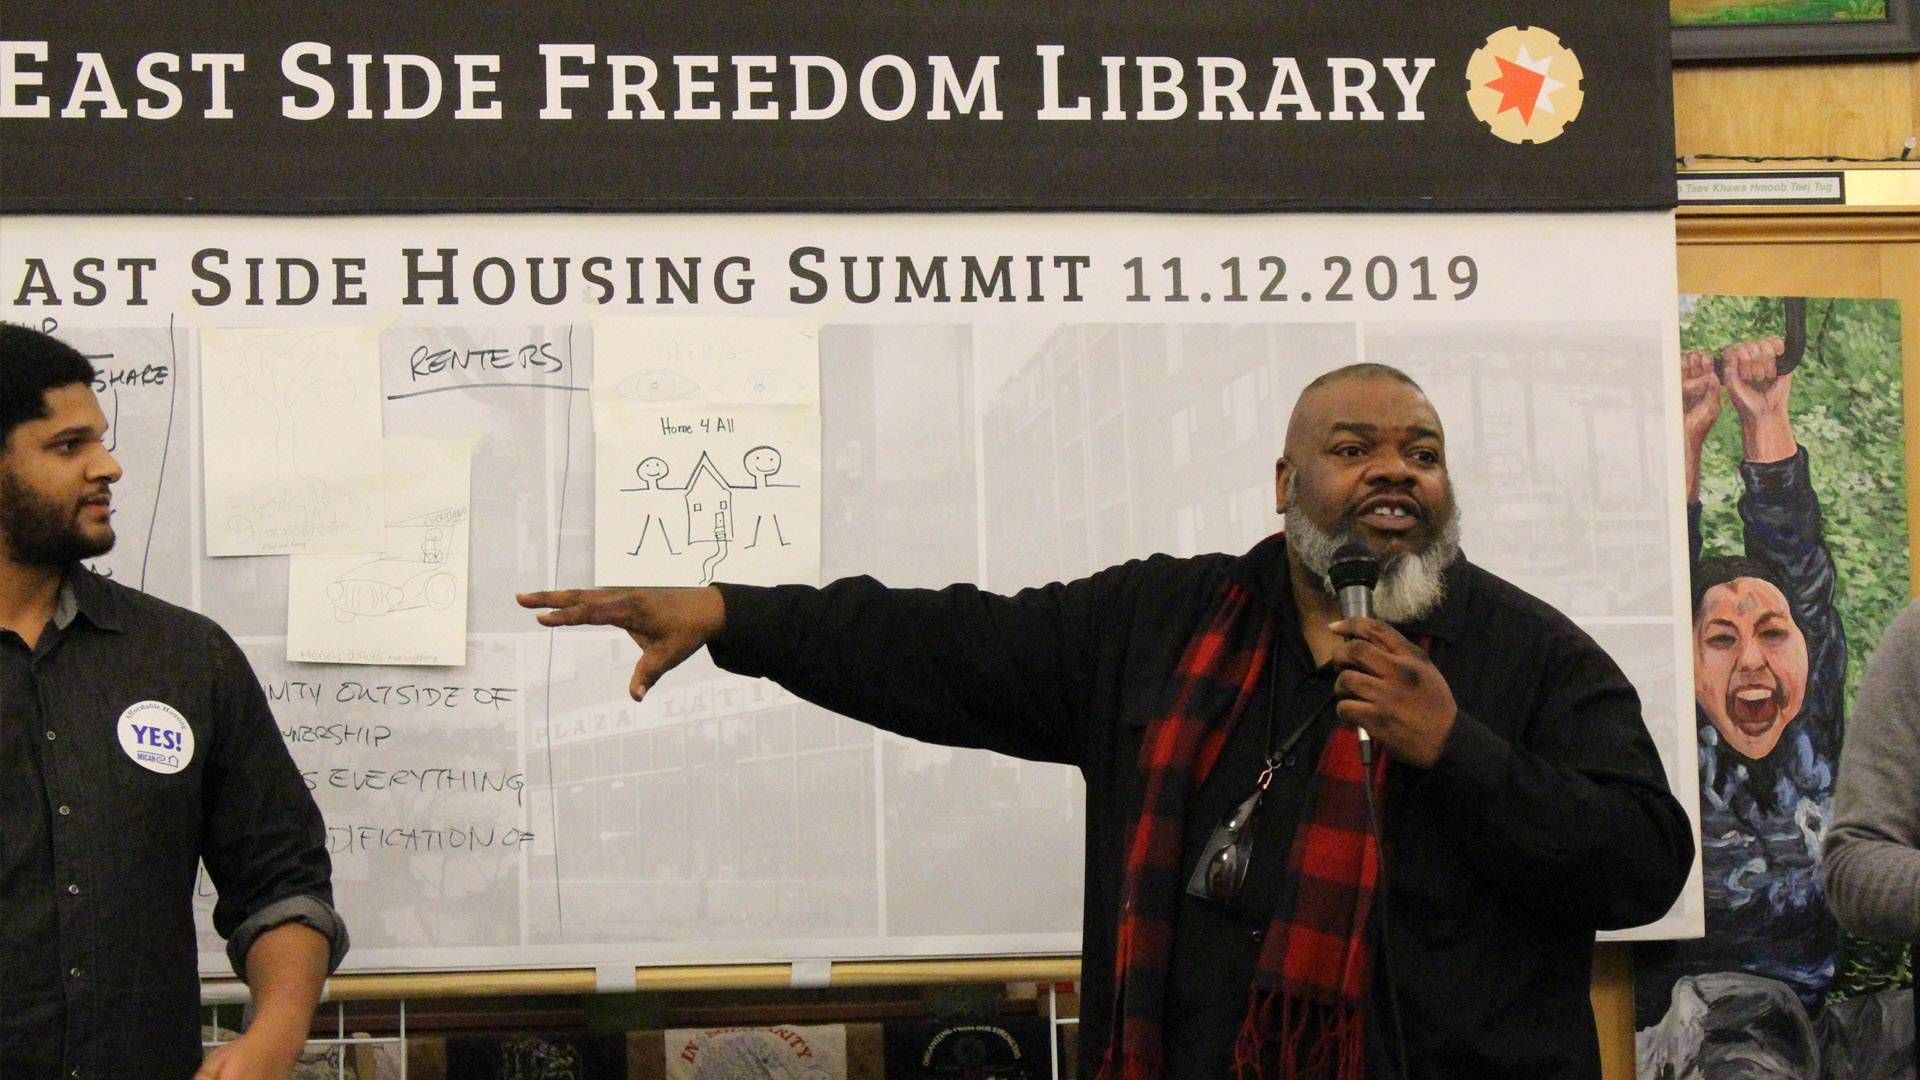 African American man talking at a library event